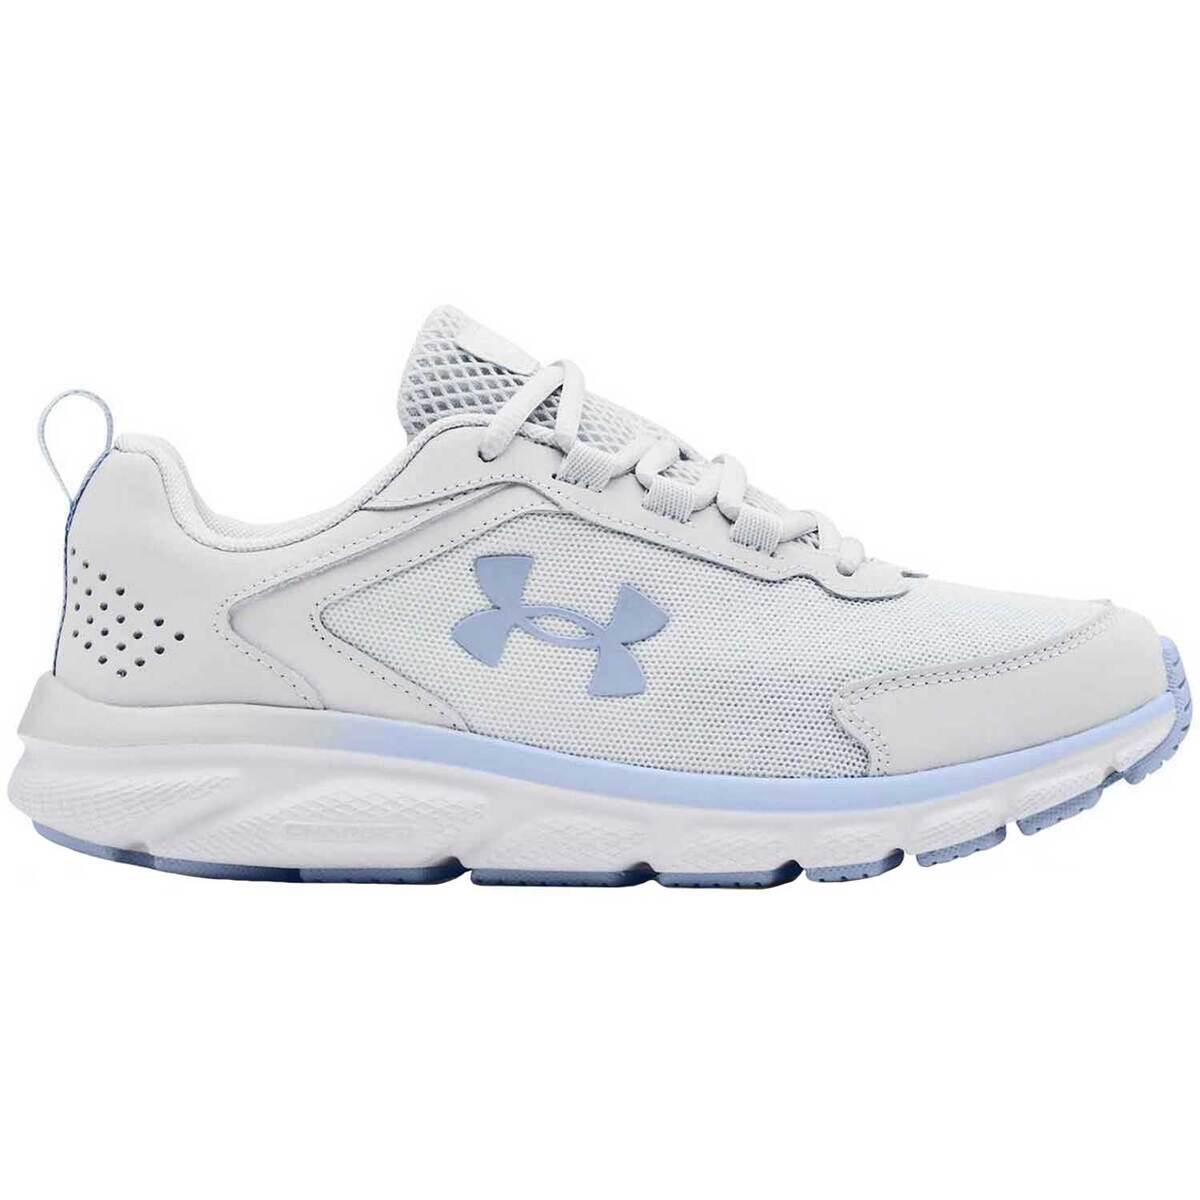 Under Armour Women's Charged Assert 9 Running Shoes | Sportsman's Warehouse